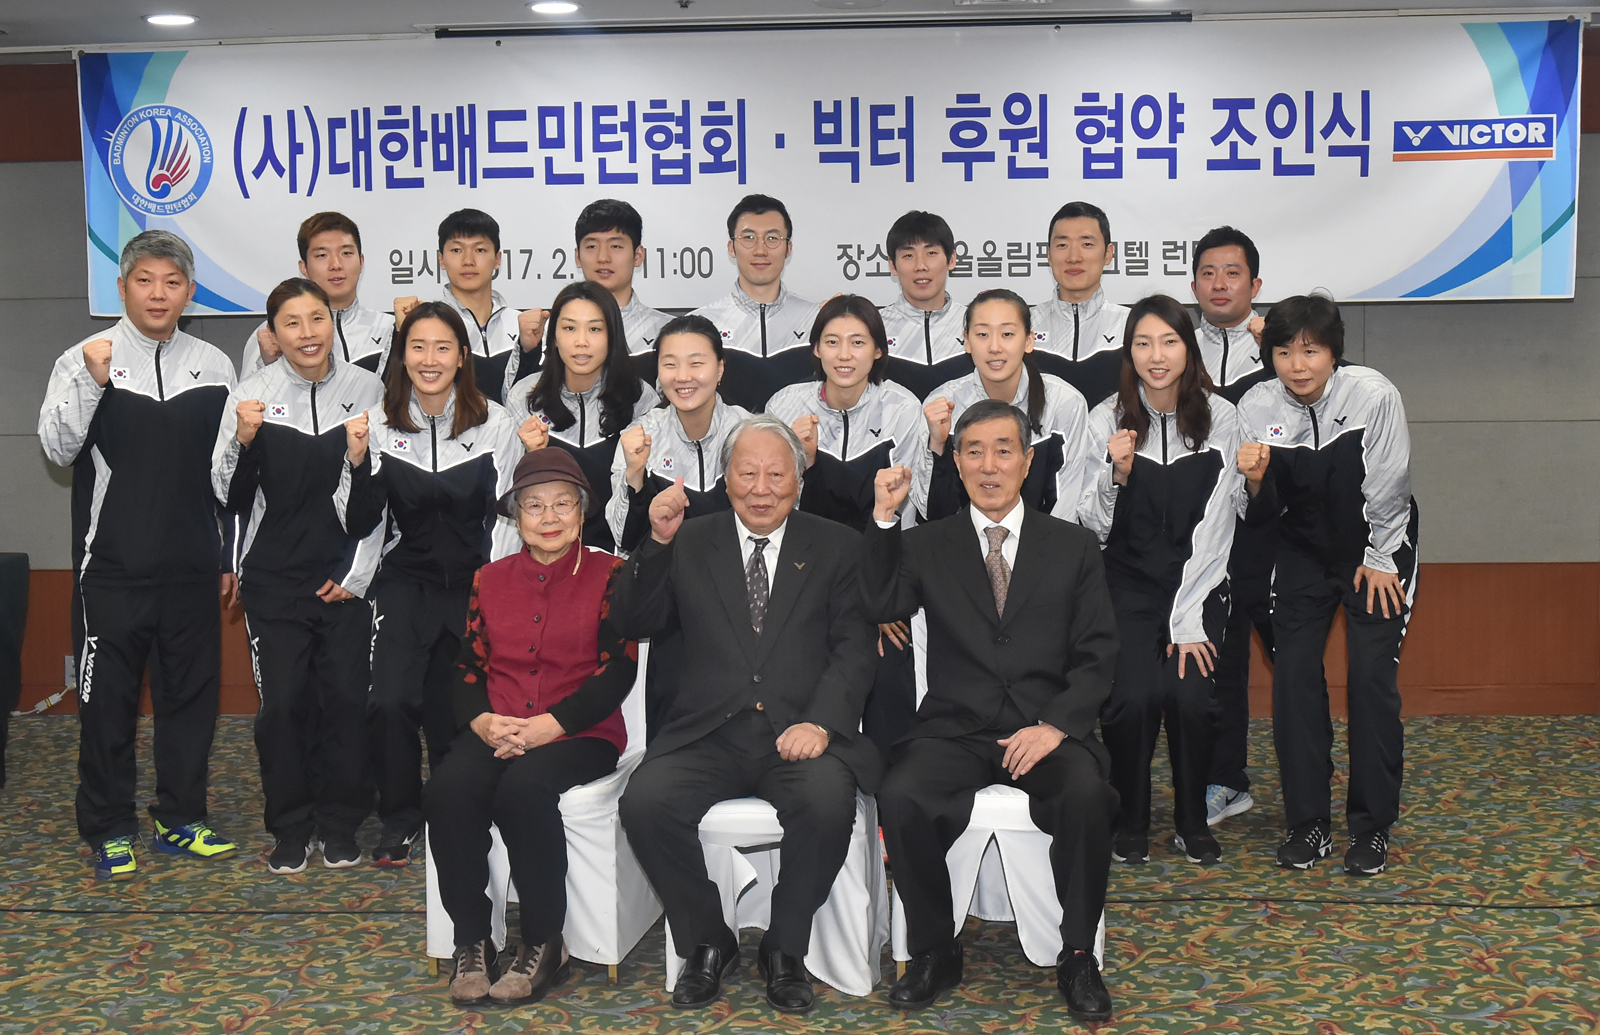 The Korean National Badminton Team will be sponsored by Victor for another 4 years. The Victor Rackets Ind. Corp. issued a press release today after the Badminton Korea Association (BKA) […]